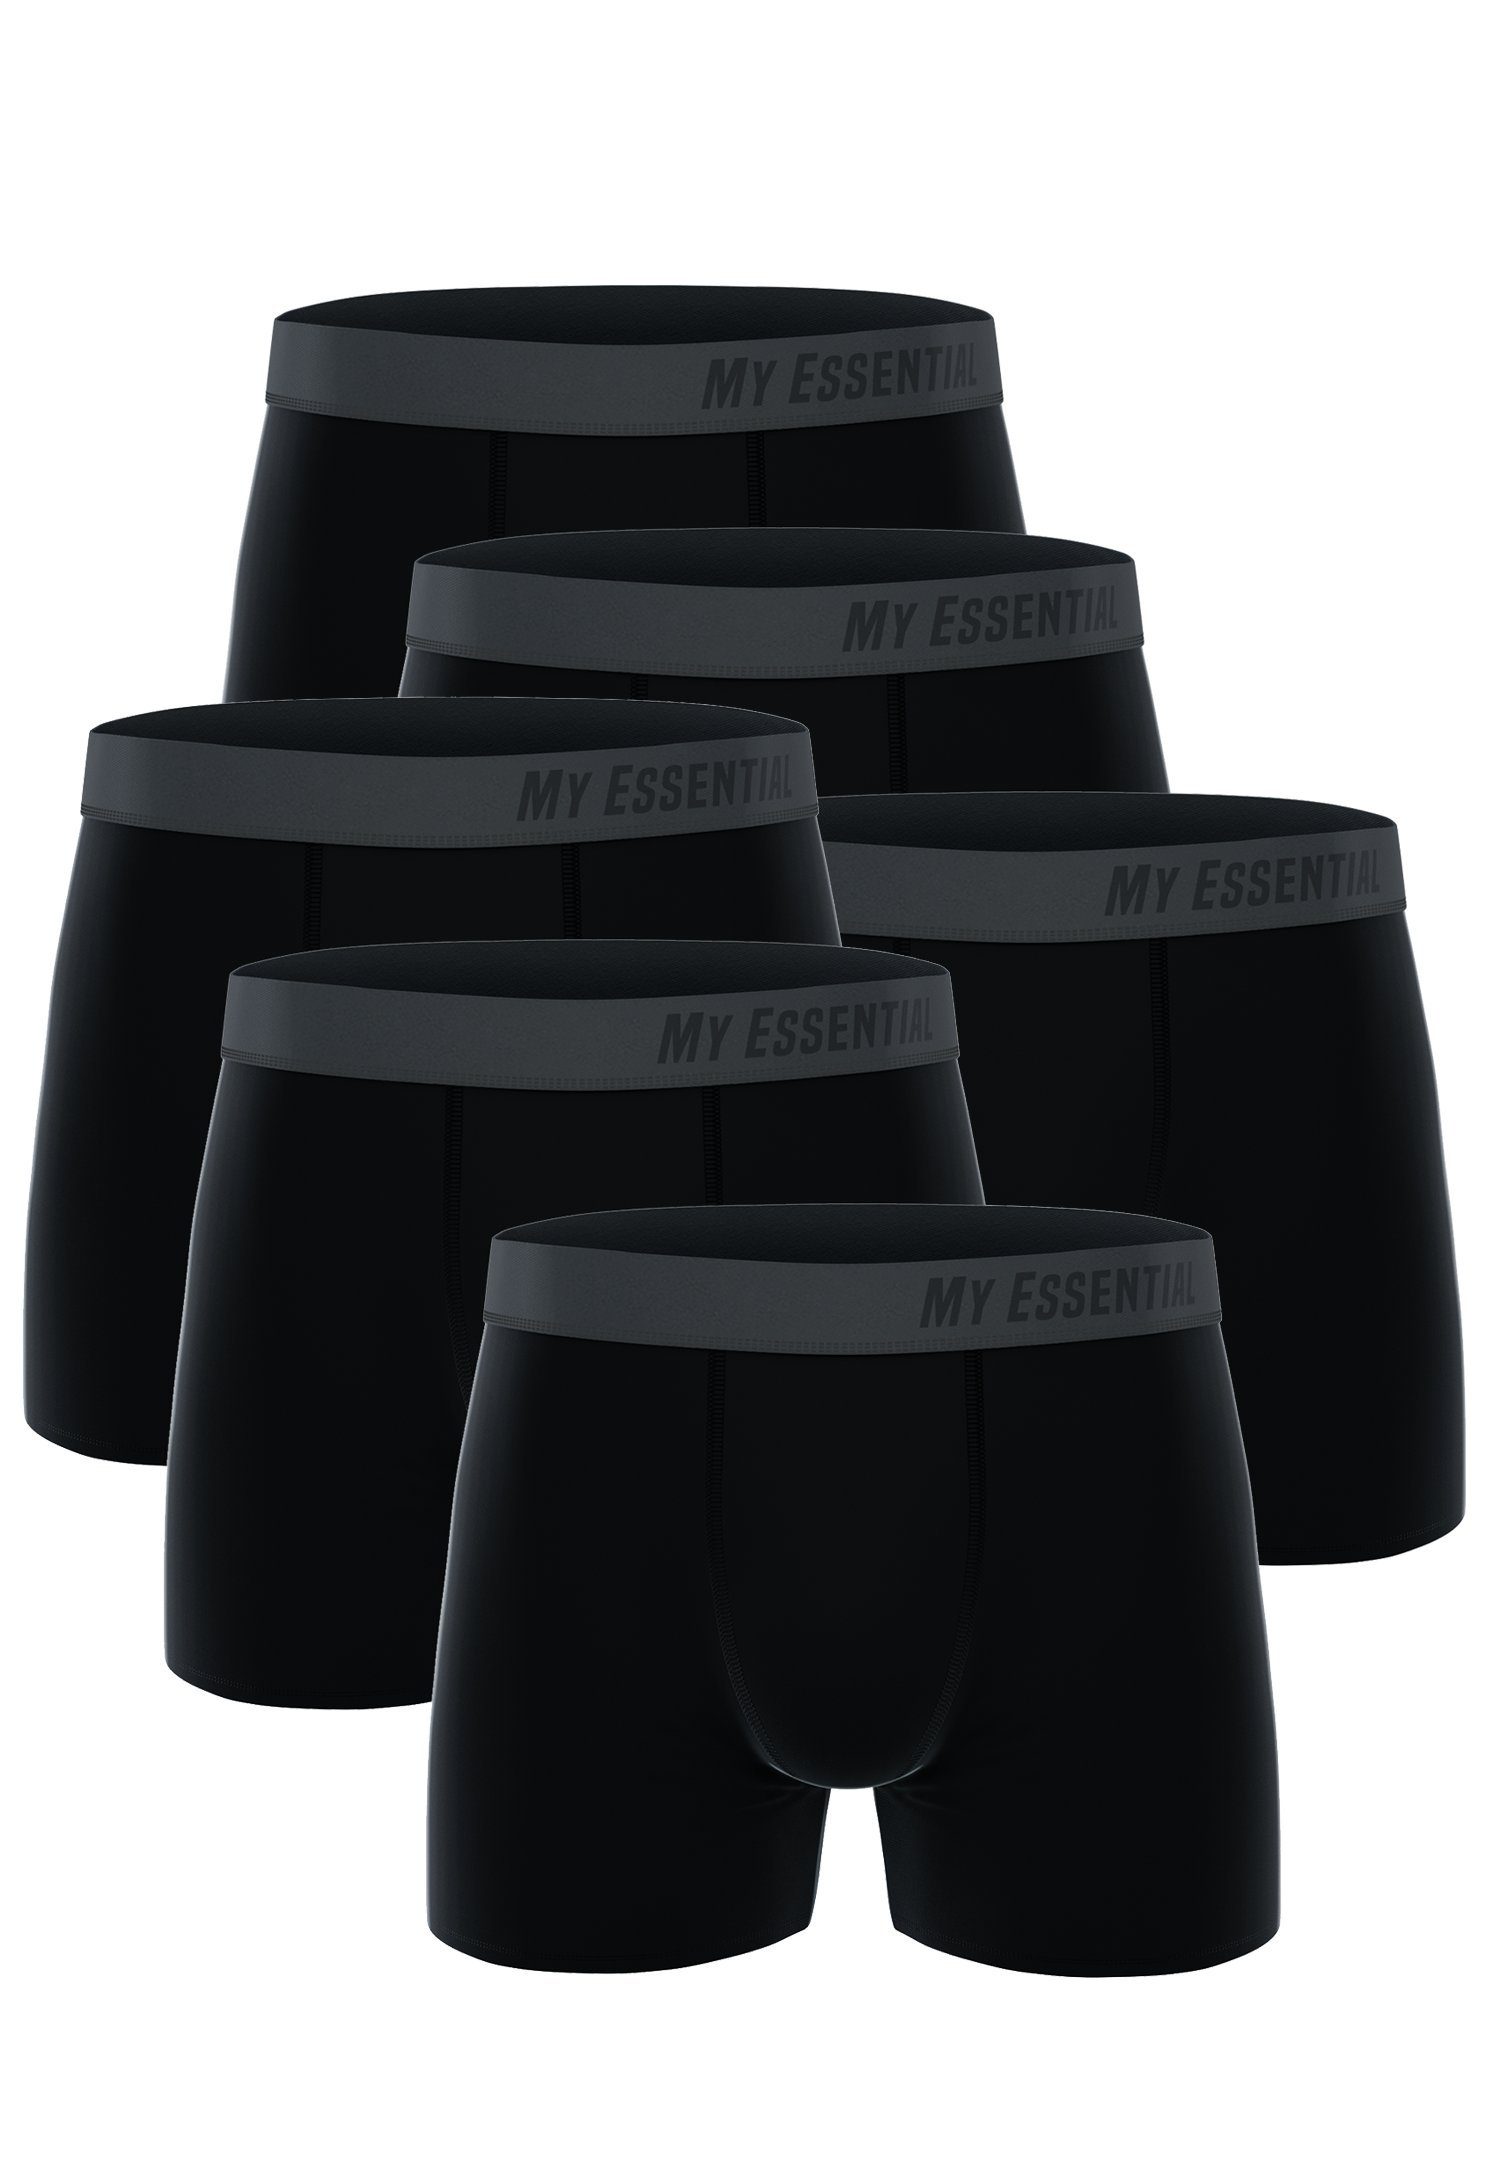 My Essential Clothing Boxershorts My Essential 6 Pack Boxers Cotton Bio (Spar-Pack, 6-St., 6er-Pack) Black